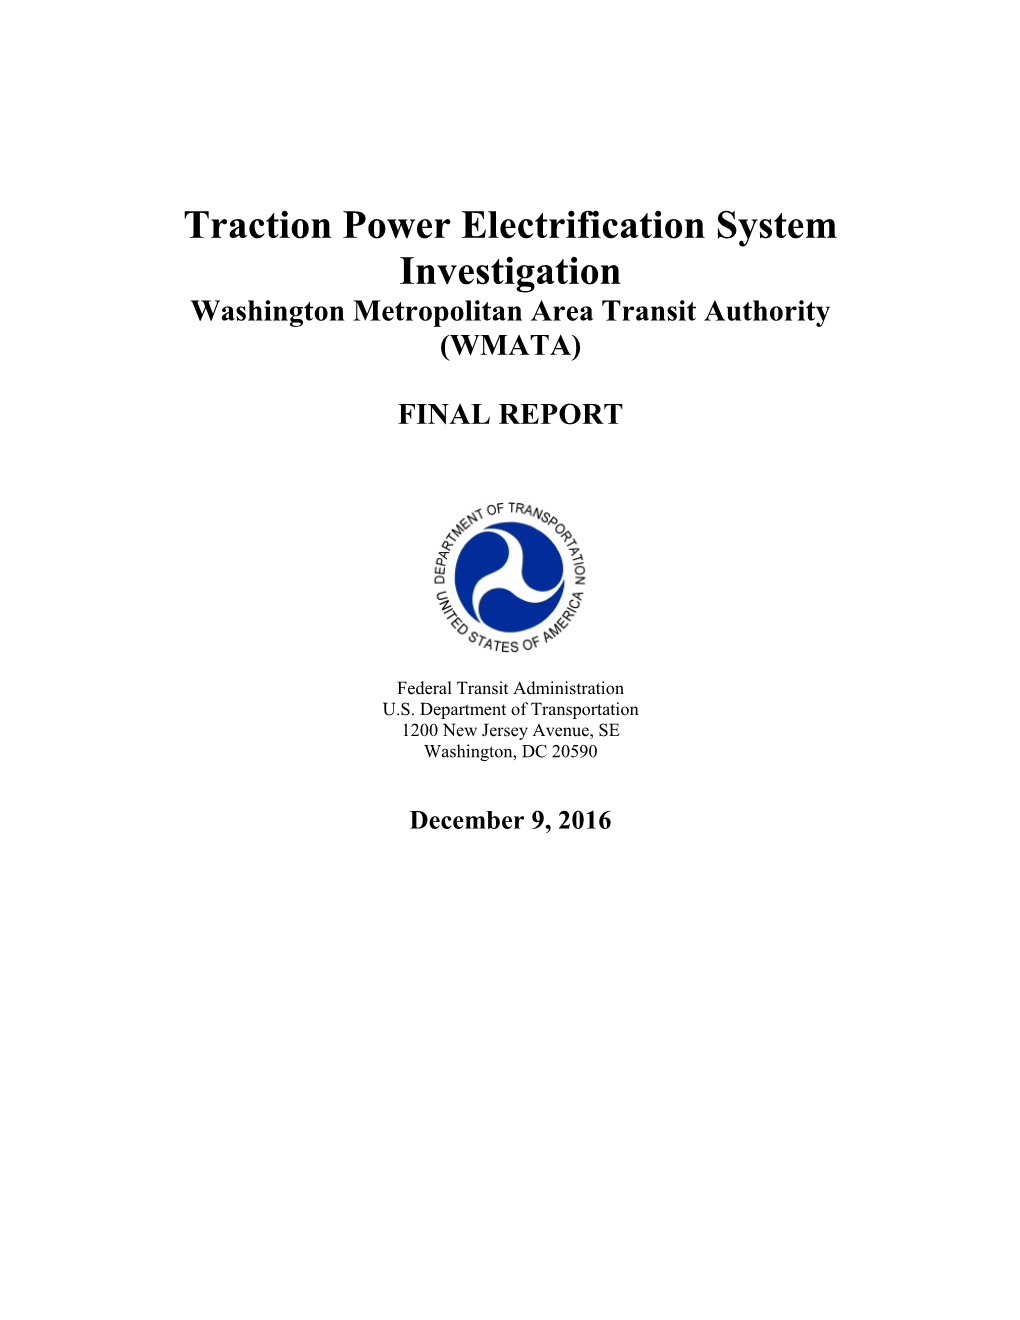 Traction Power Electrification System Investigation (WMATA)